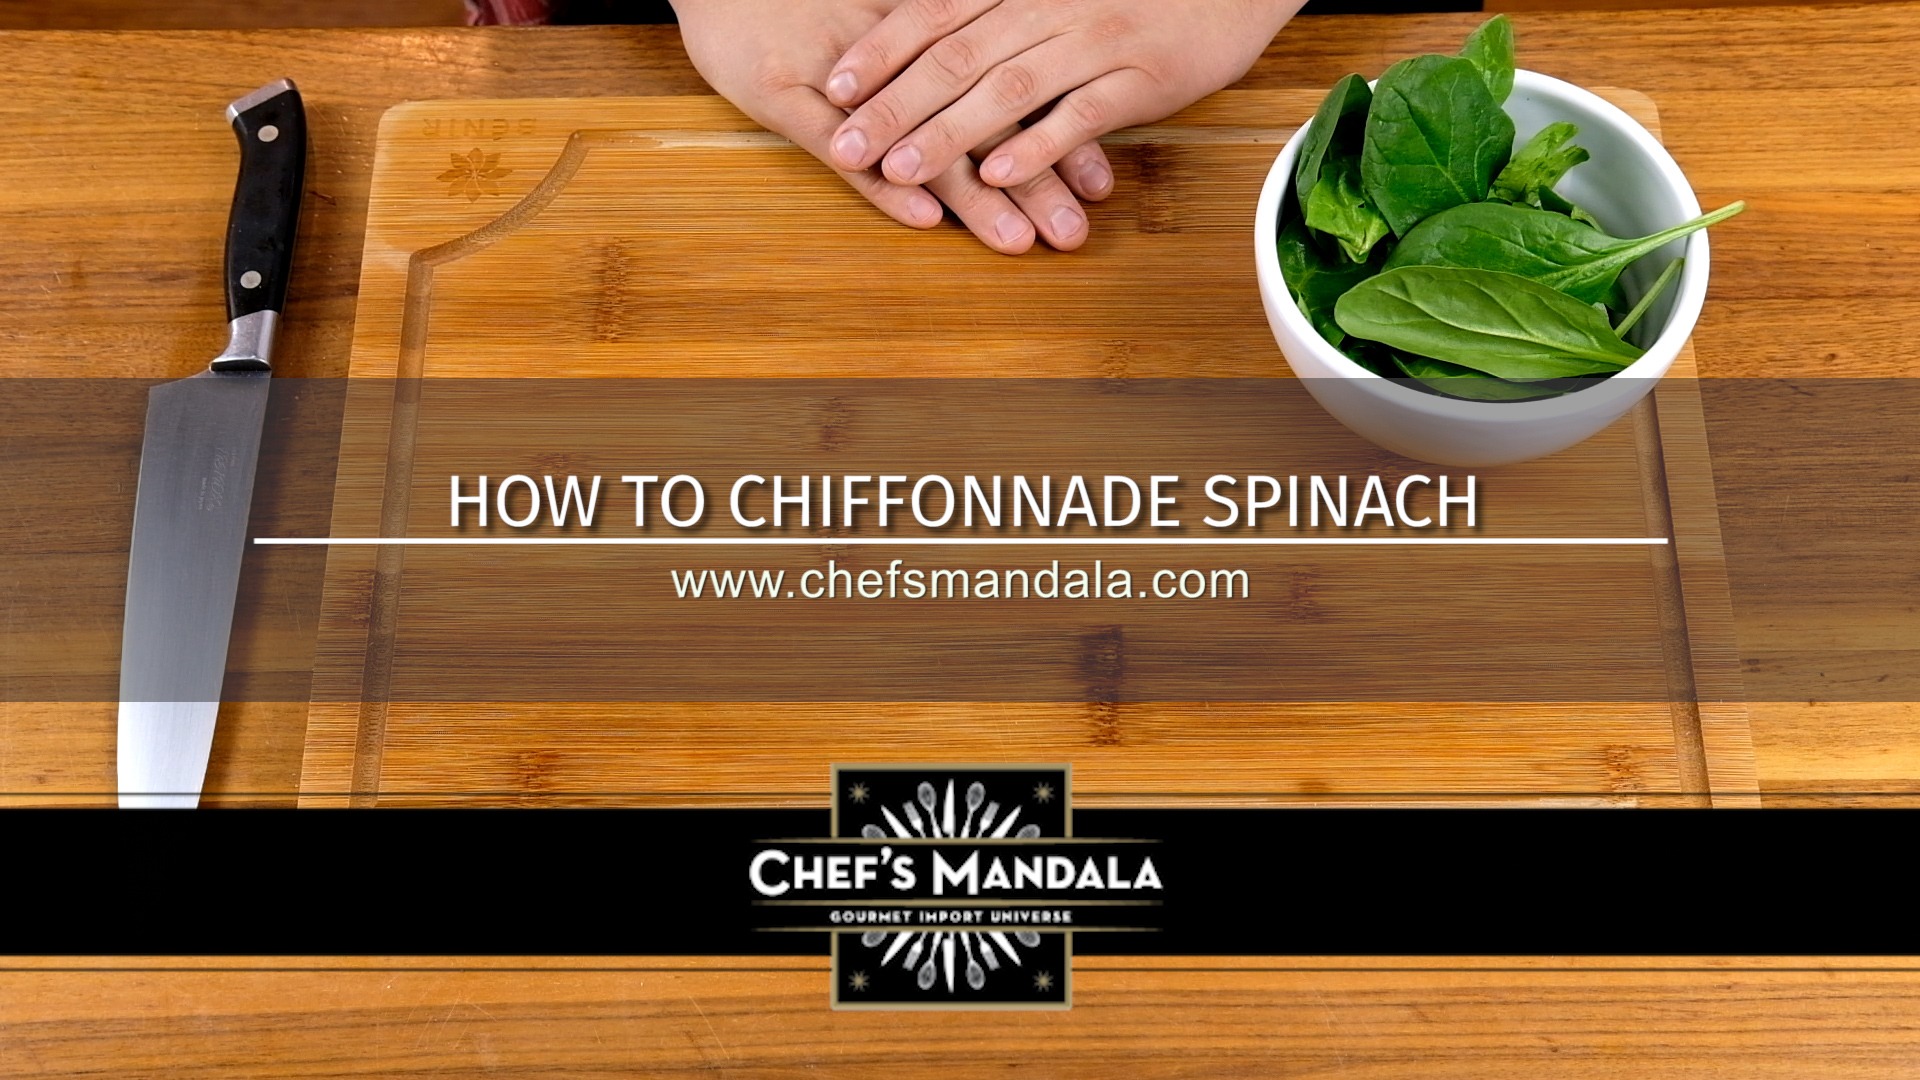 HOW TO CHIFONNADE SPINACH